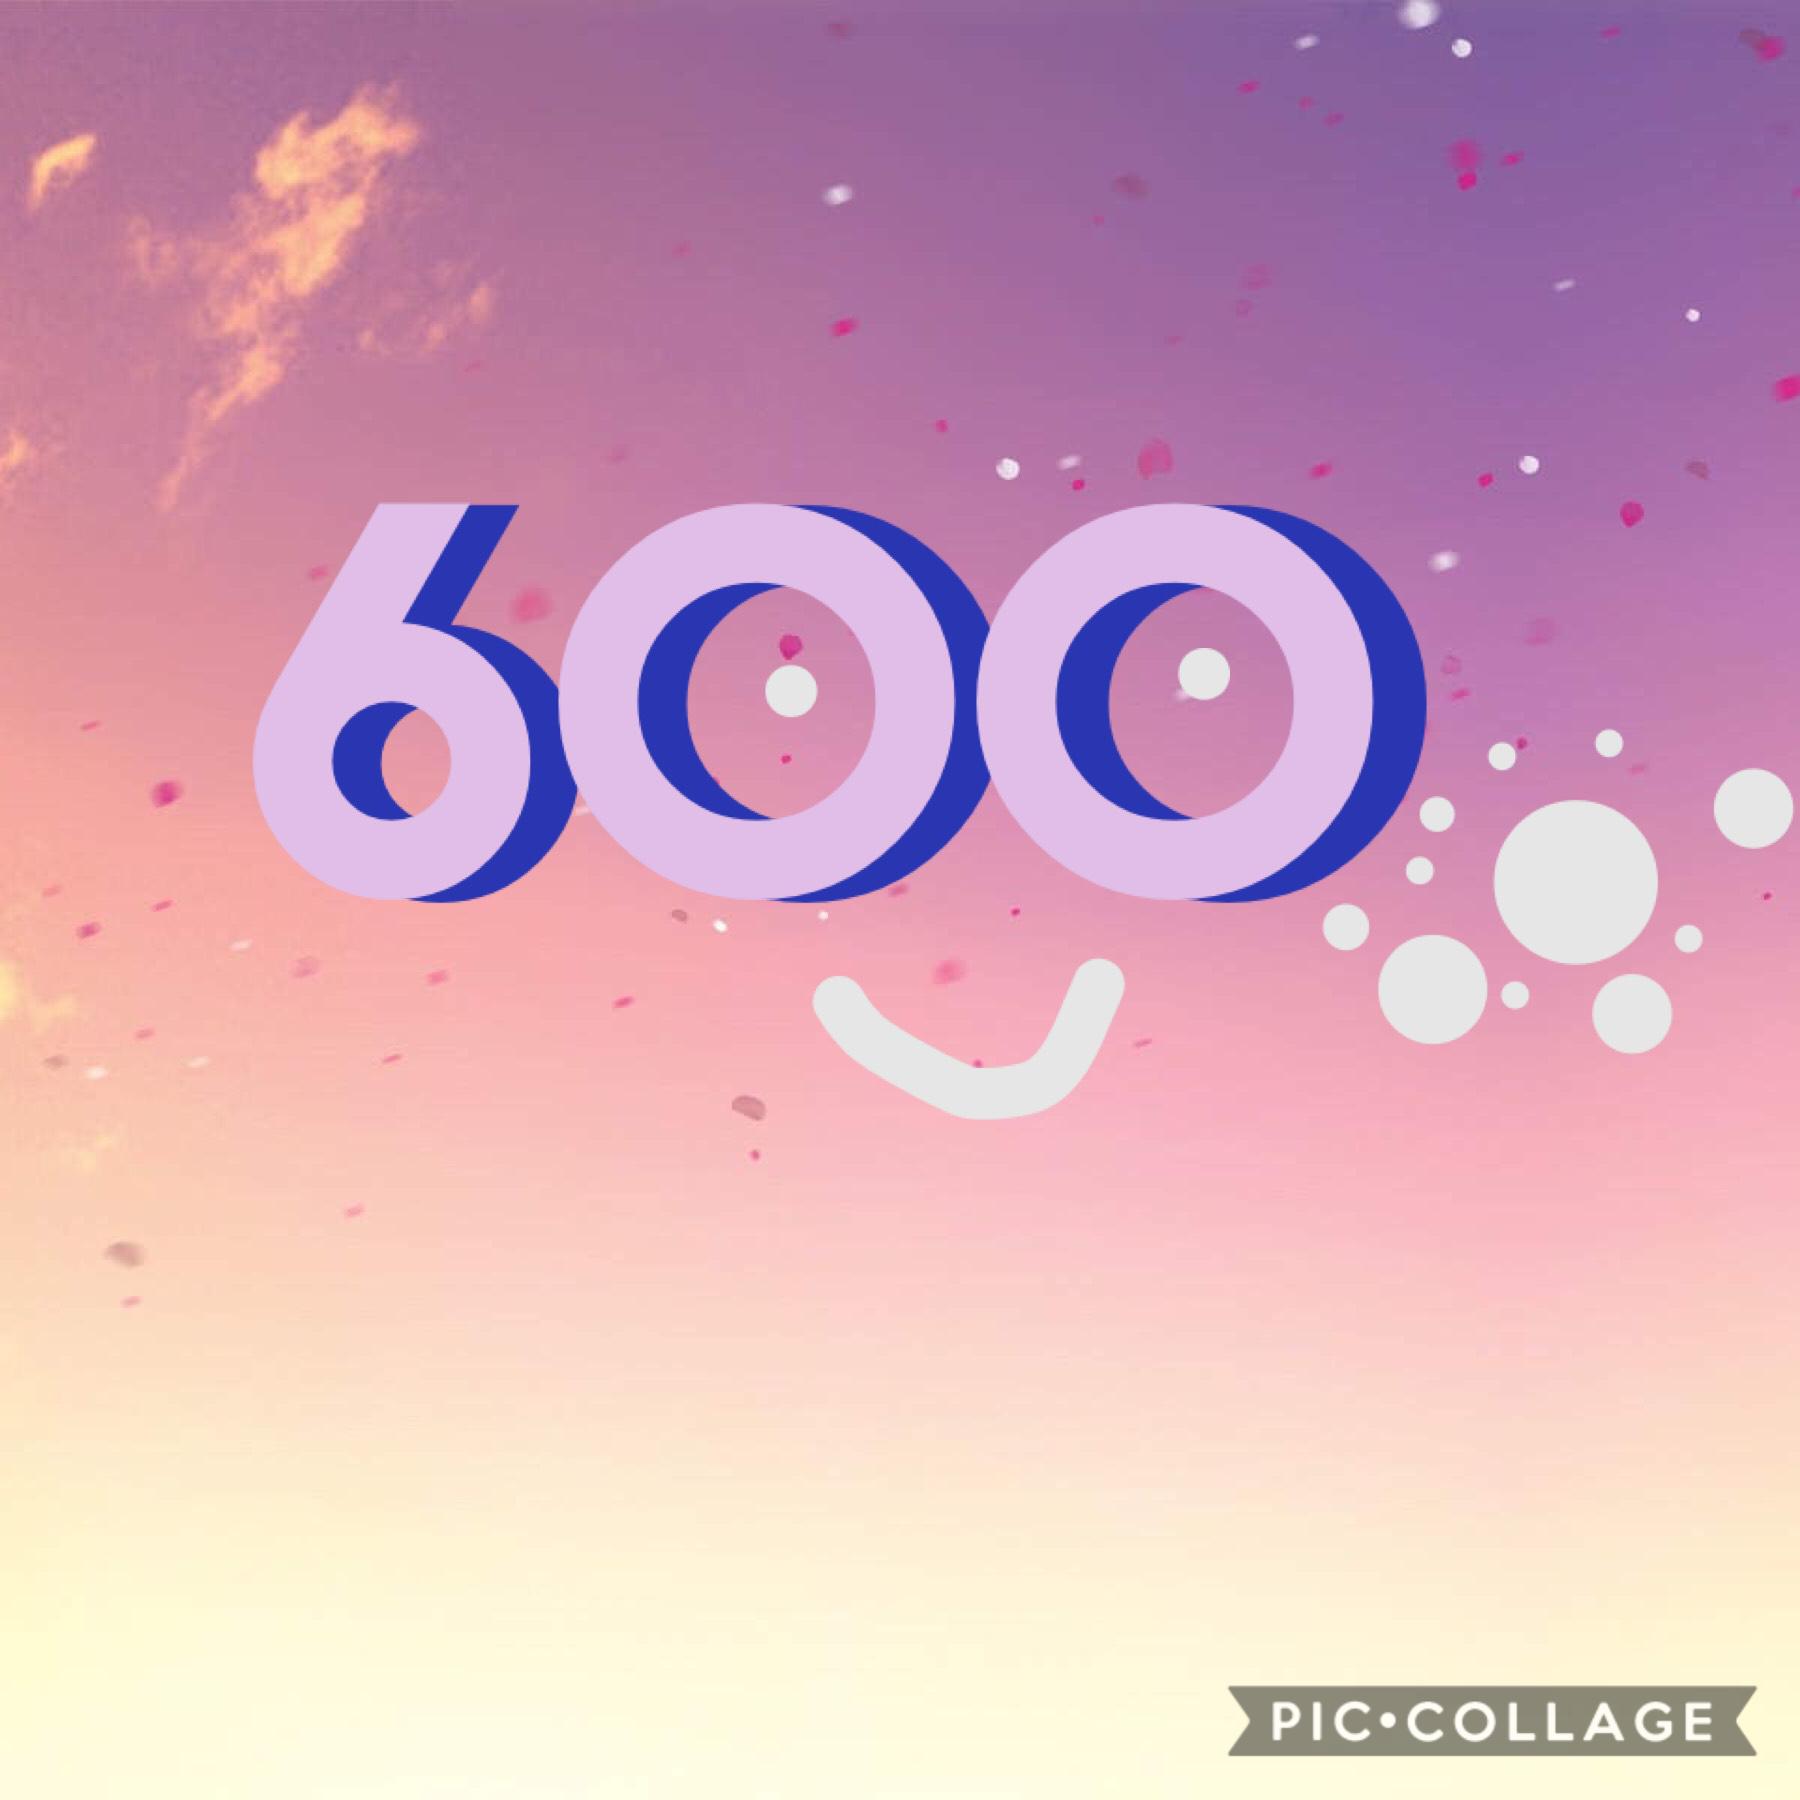 YASSSS 600!!!!! THX GUYS!!! Shout out to ashes-to-roses for being my 600th!!!